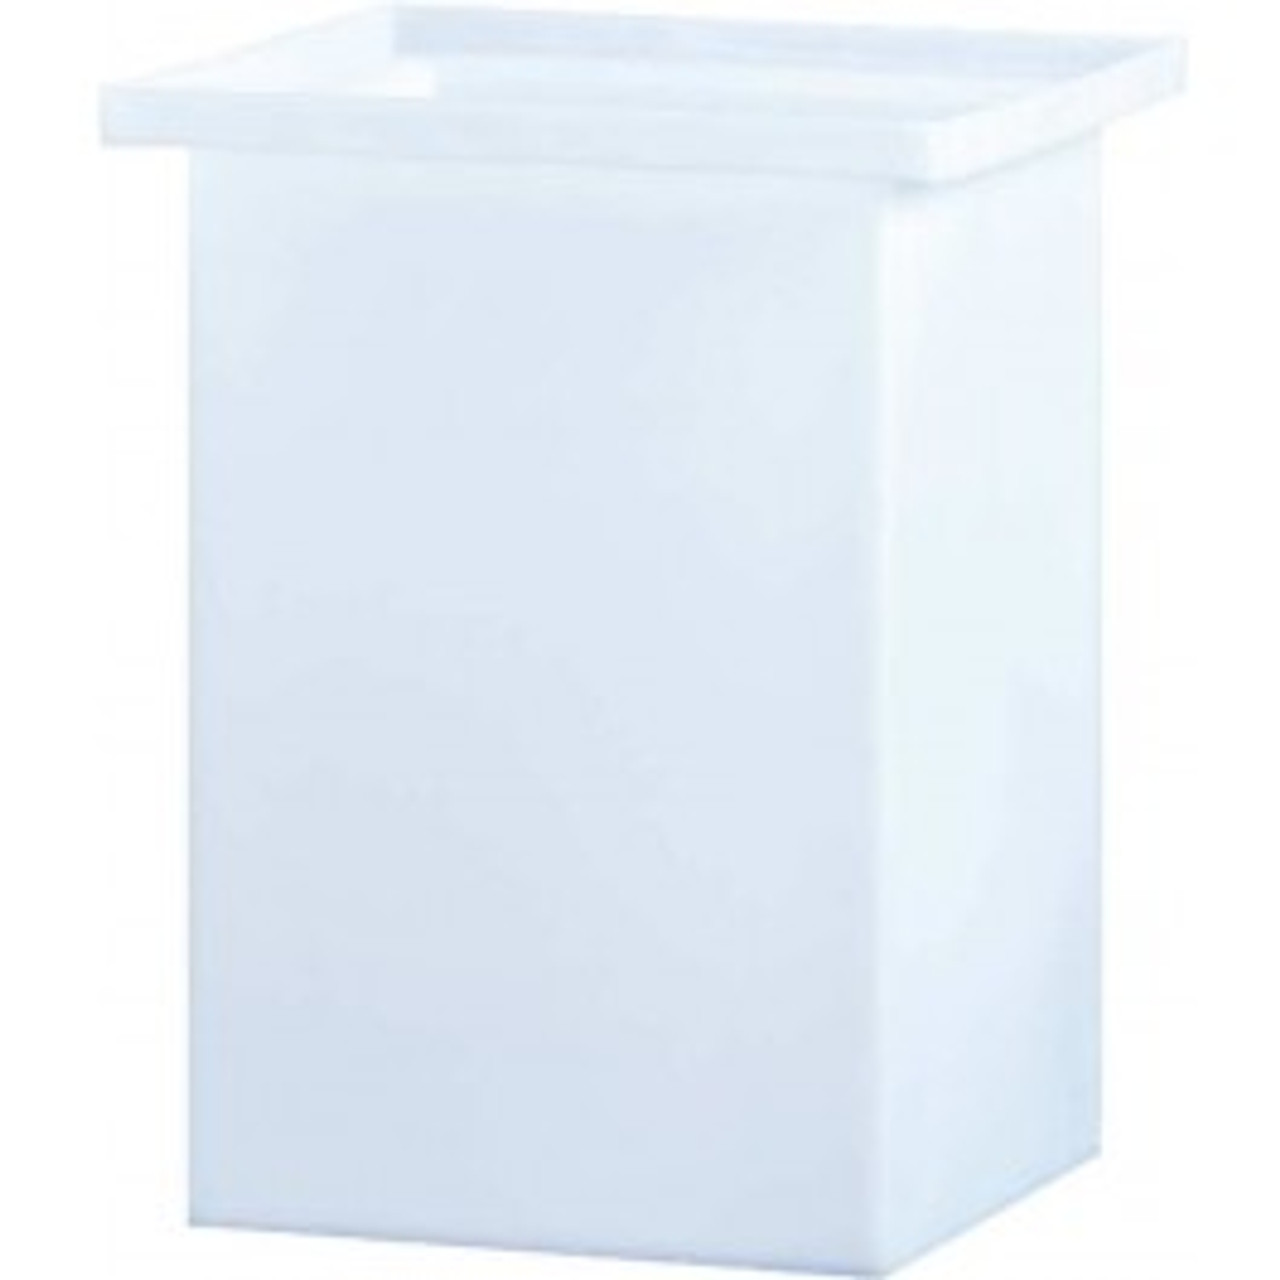 An image of a 56 Gallon PP Chem-Tainer White Rectangular Open Top Tank | R182430B